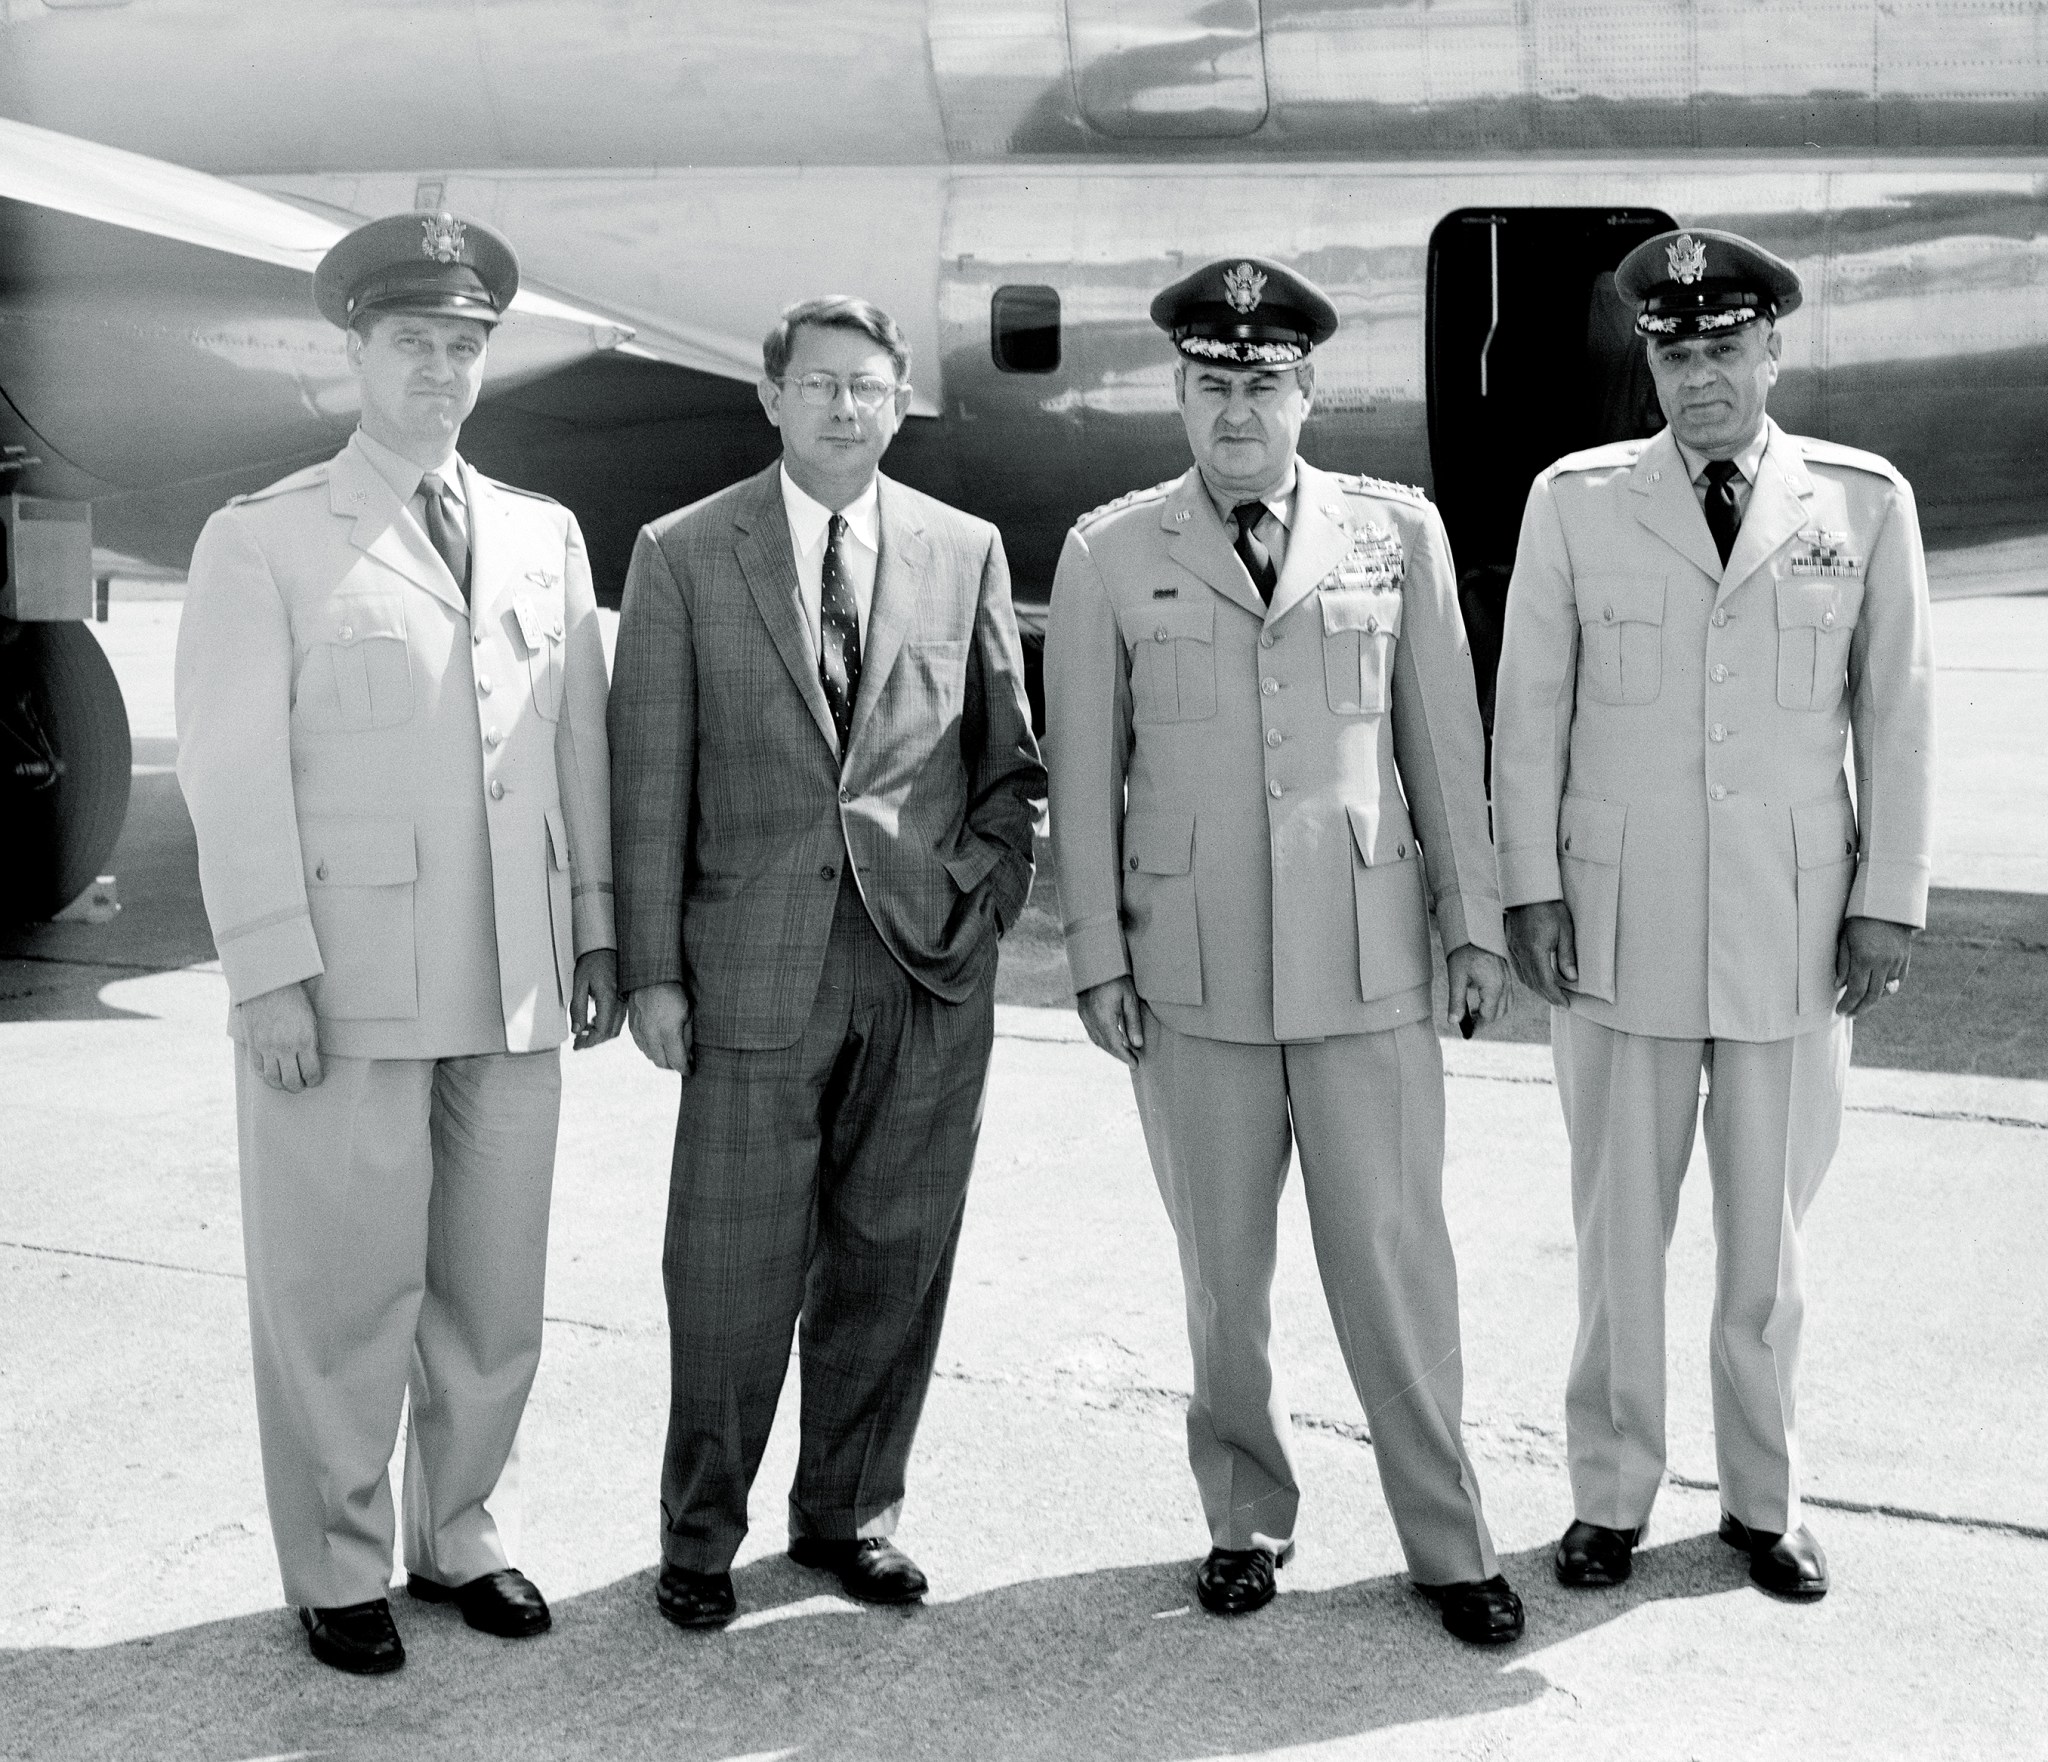 Three military officers standing with man on tarmac.